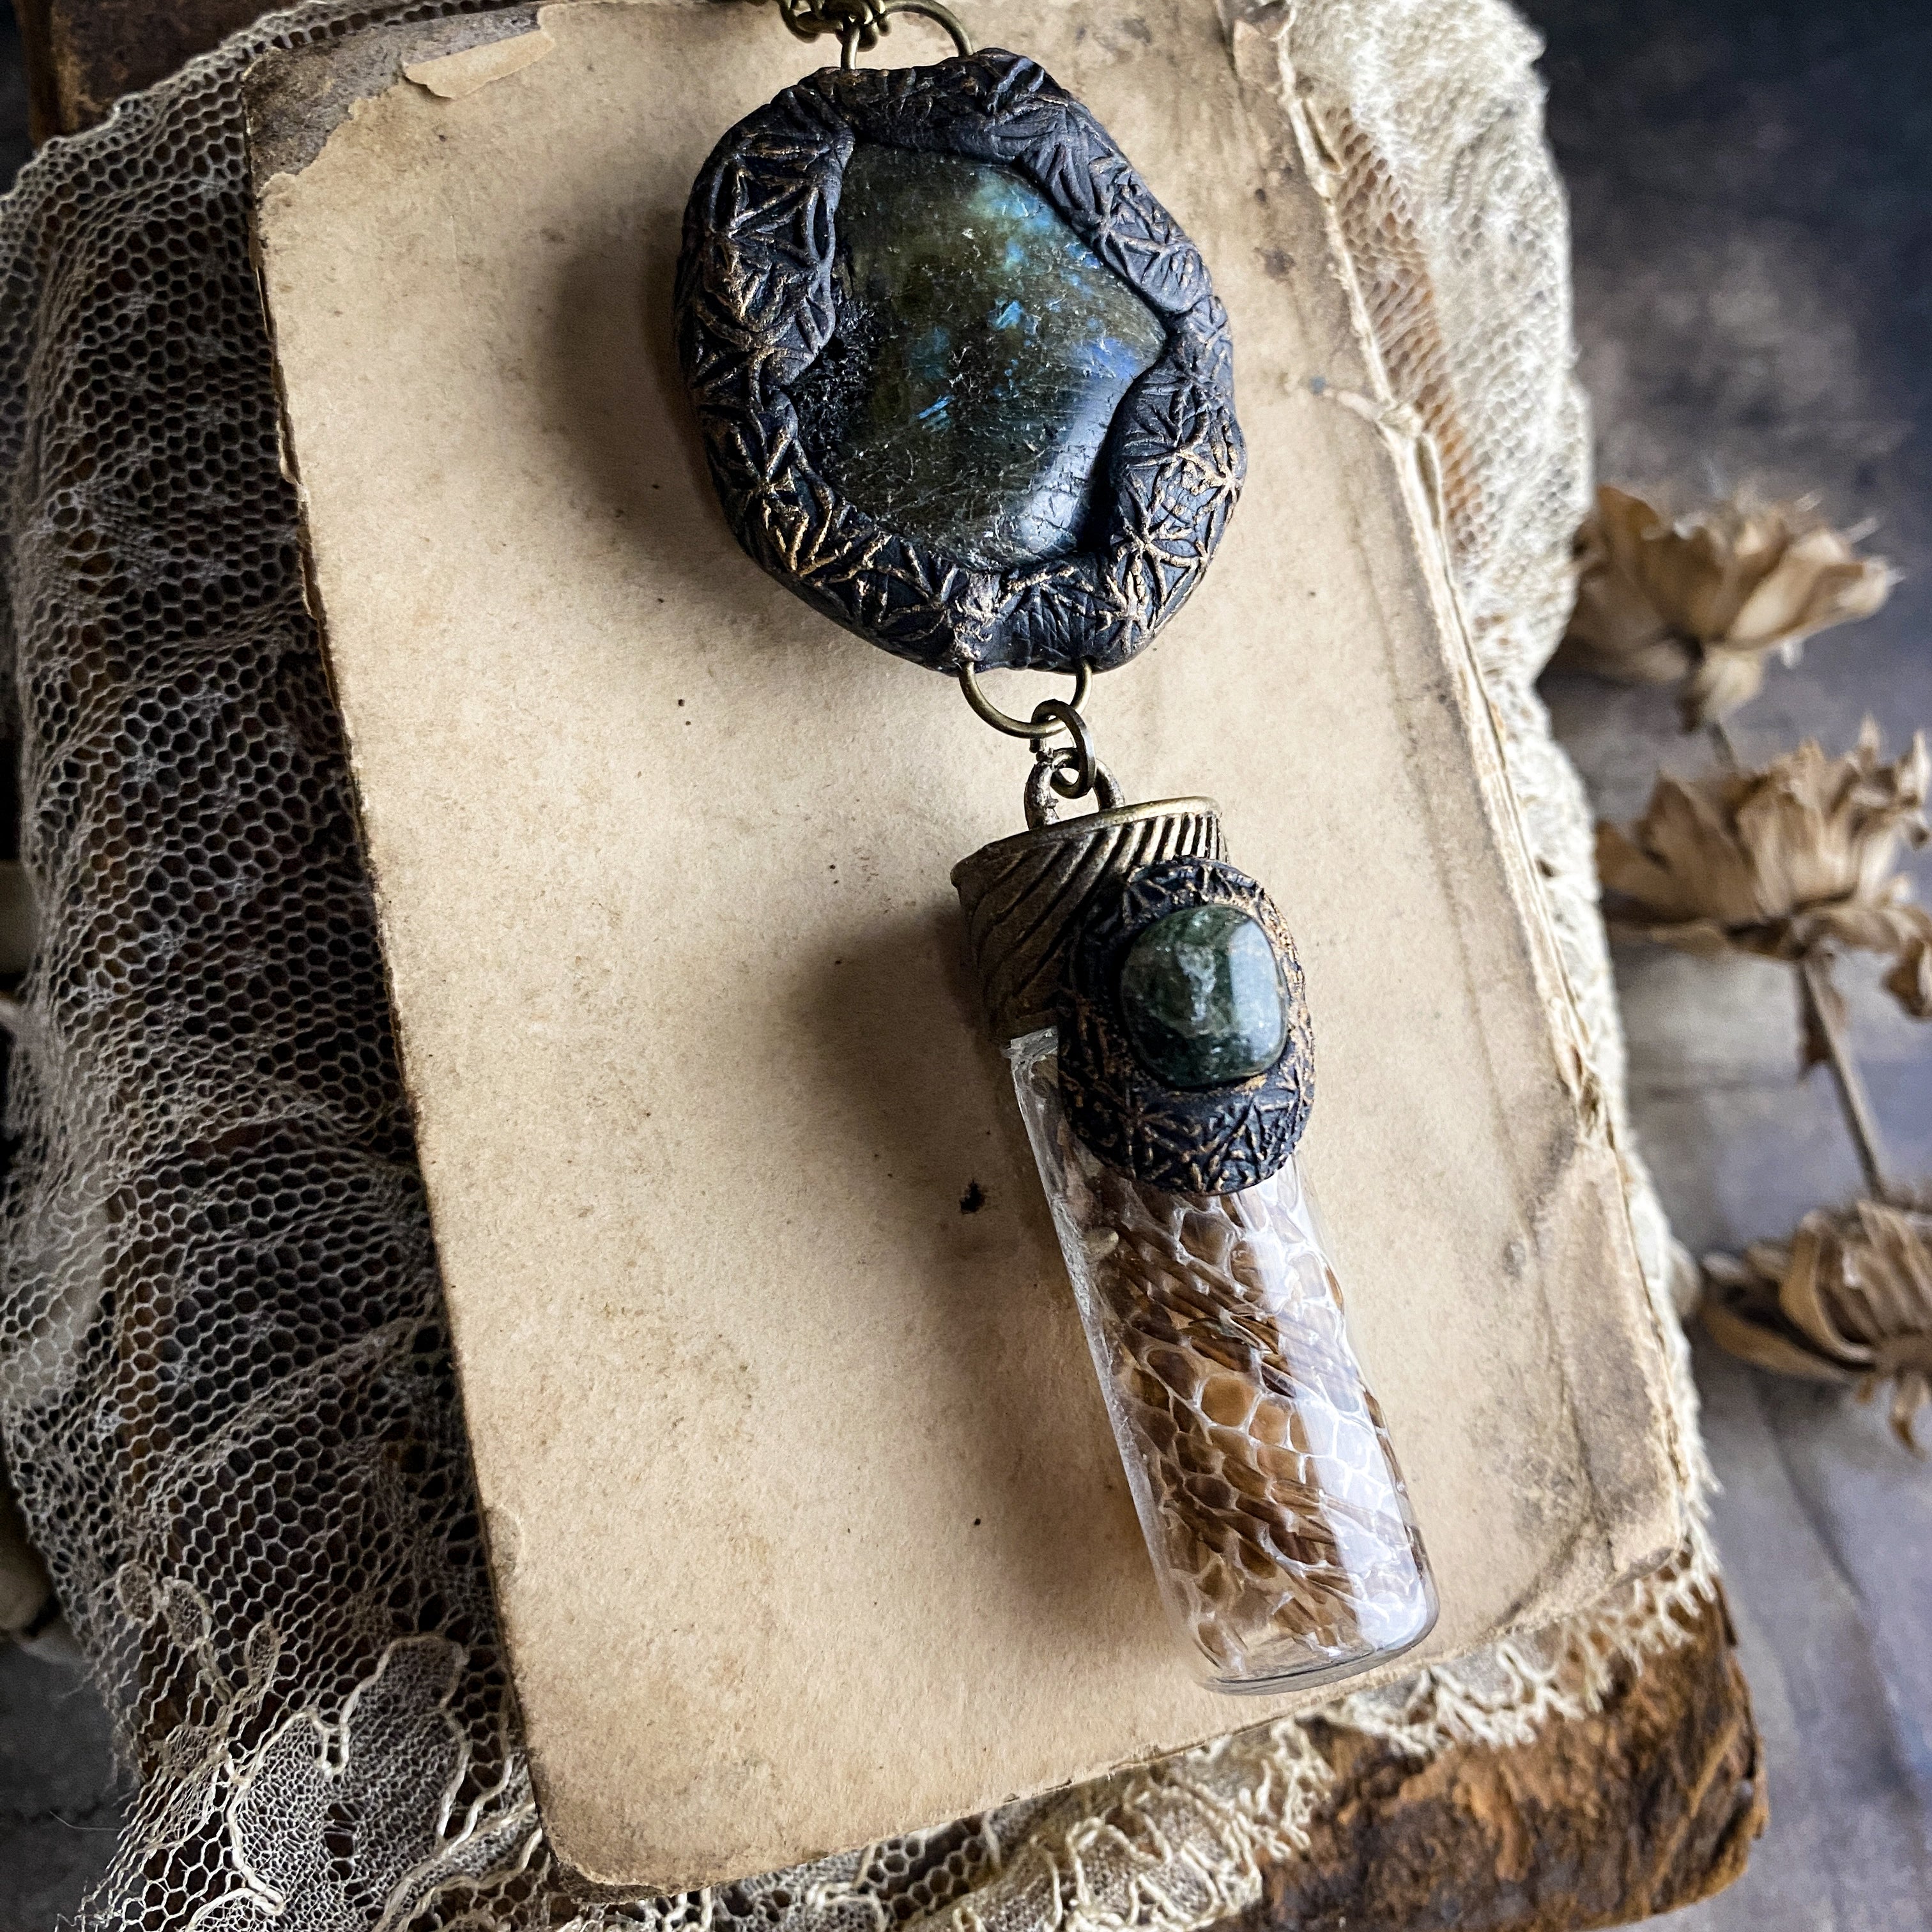 Labradorite + Ghost Quartz + Snake Skin Necklace - Handcrafted Flower of Life Clay Talisman